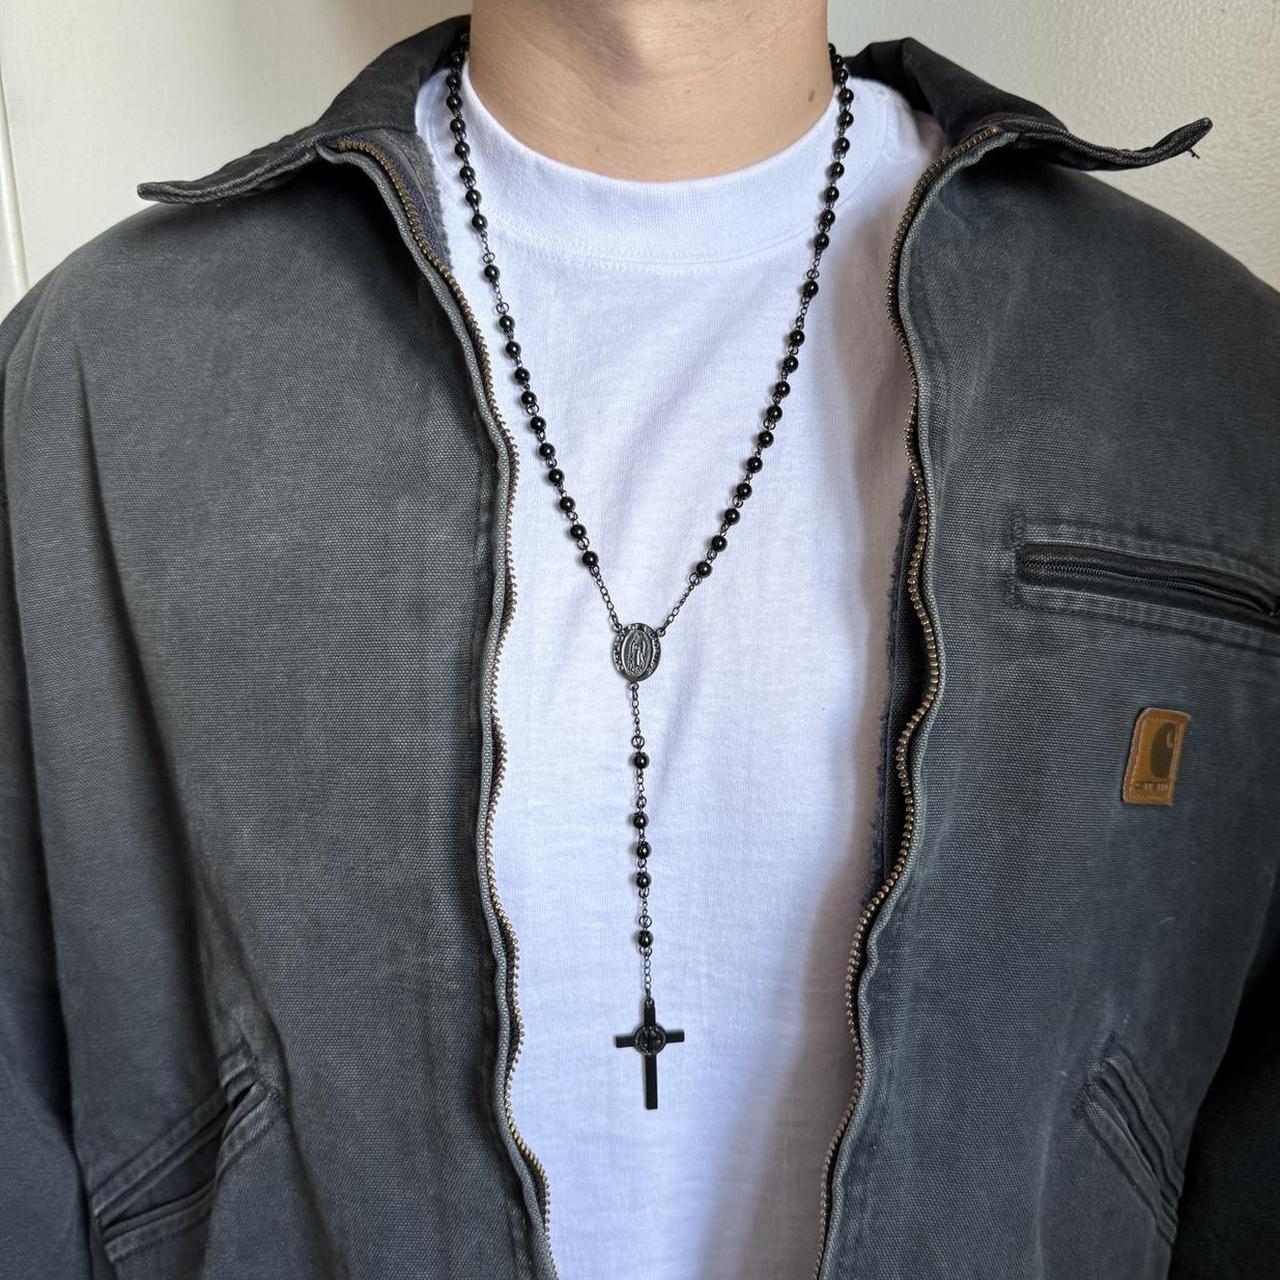 12-year-old girl banned from wearing rosary necklace at school; she's told  it's a gang symbol in her small Nebraska town | Daily Mail Online